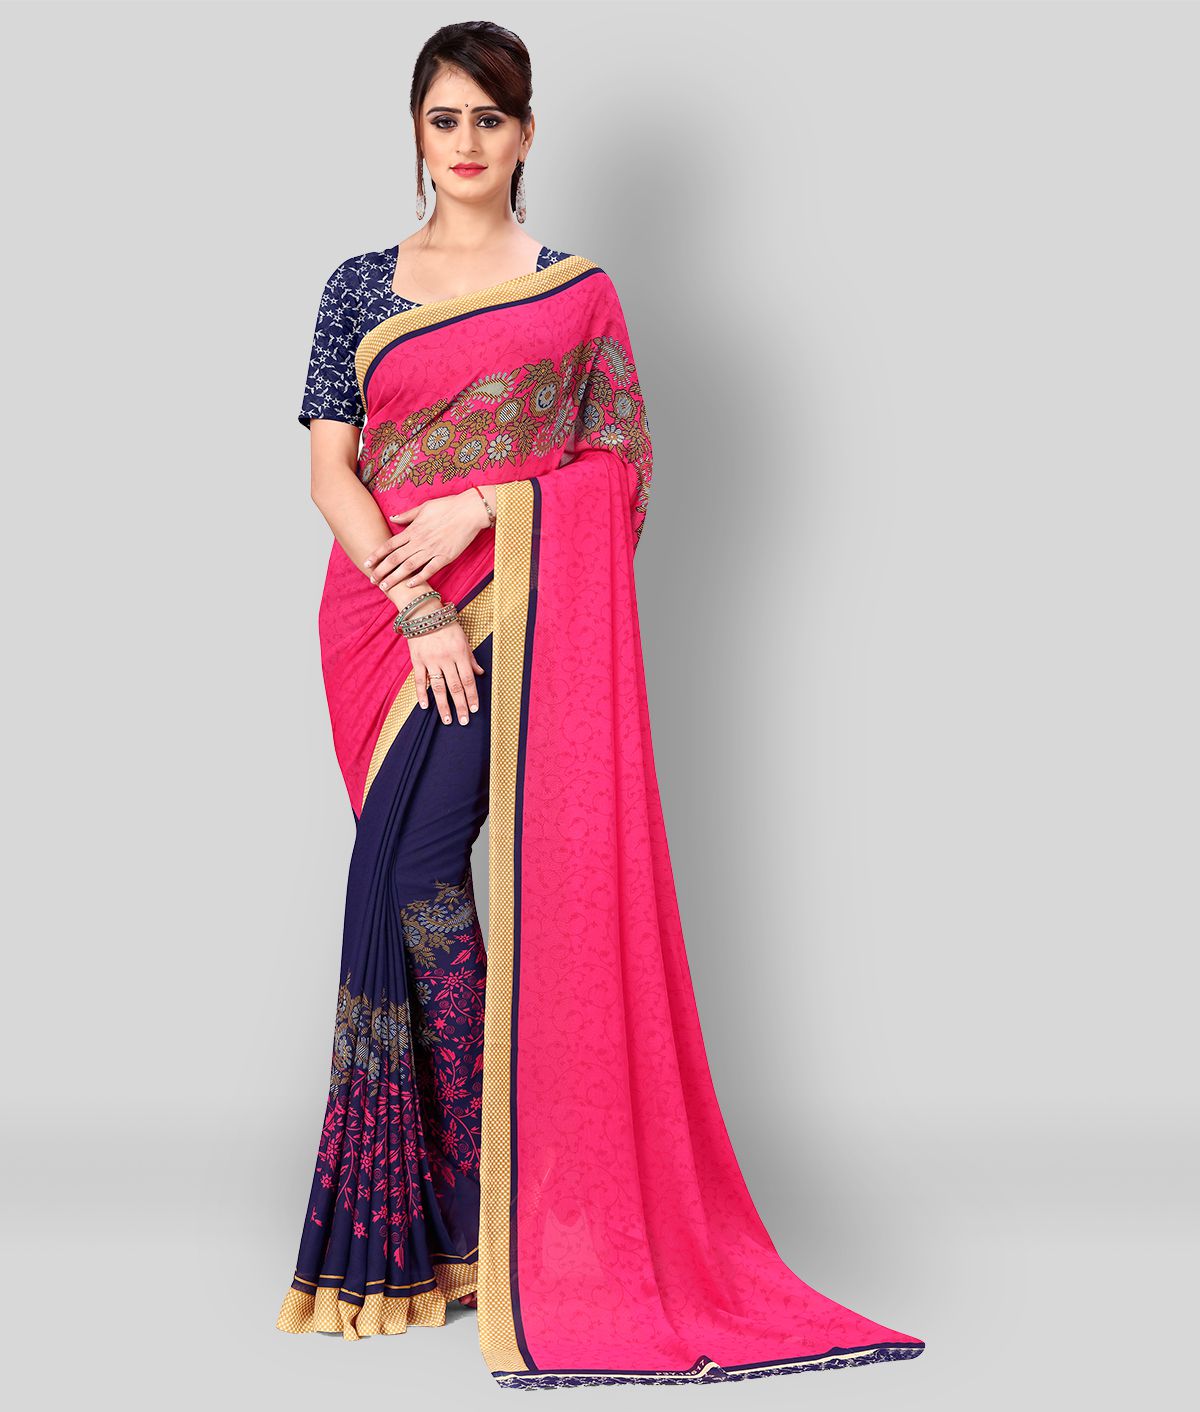 Anand Sarees - Multicolor Georgette Saree With Blouse Piece (Pack of 1)